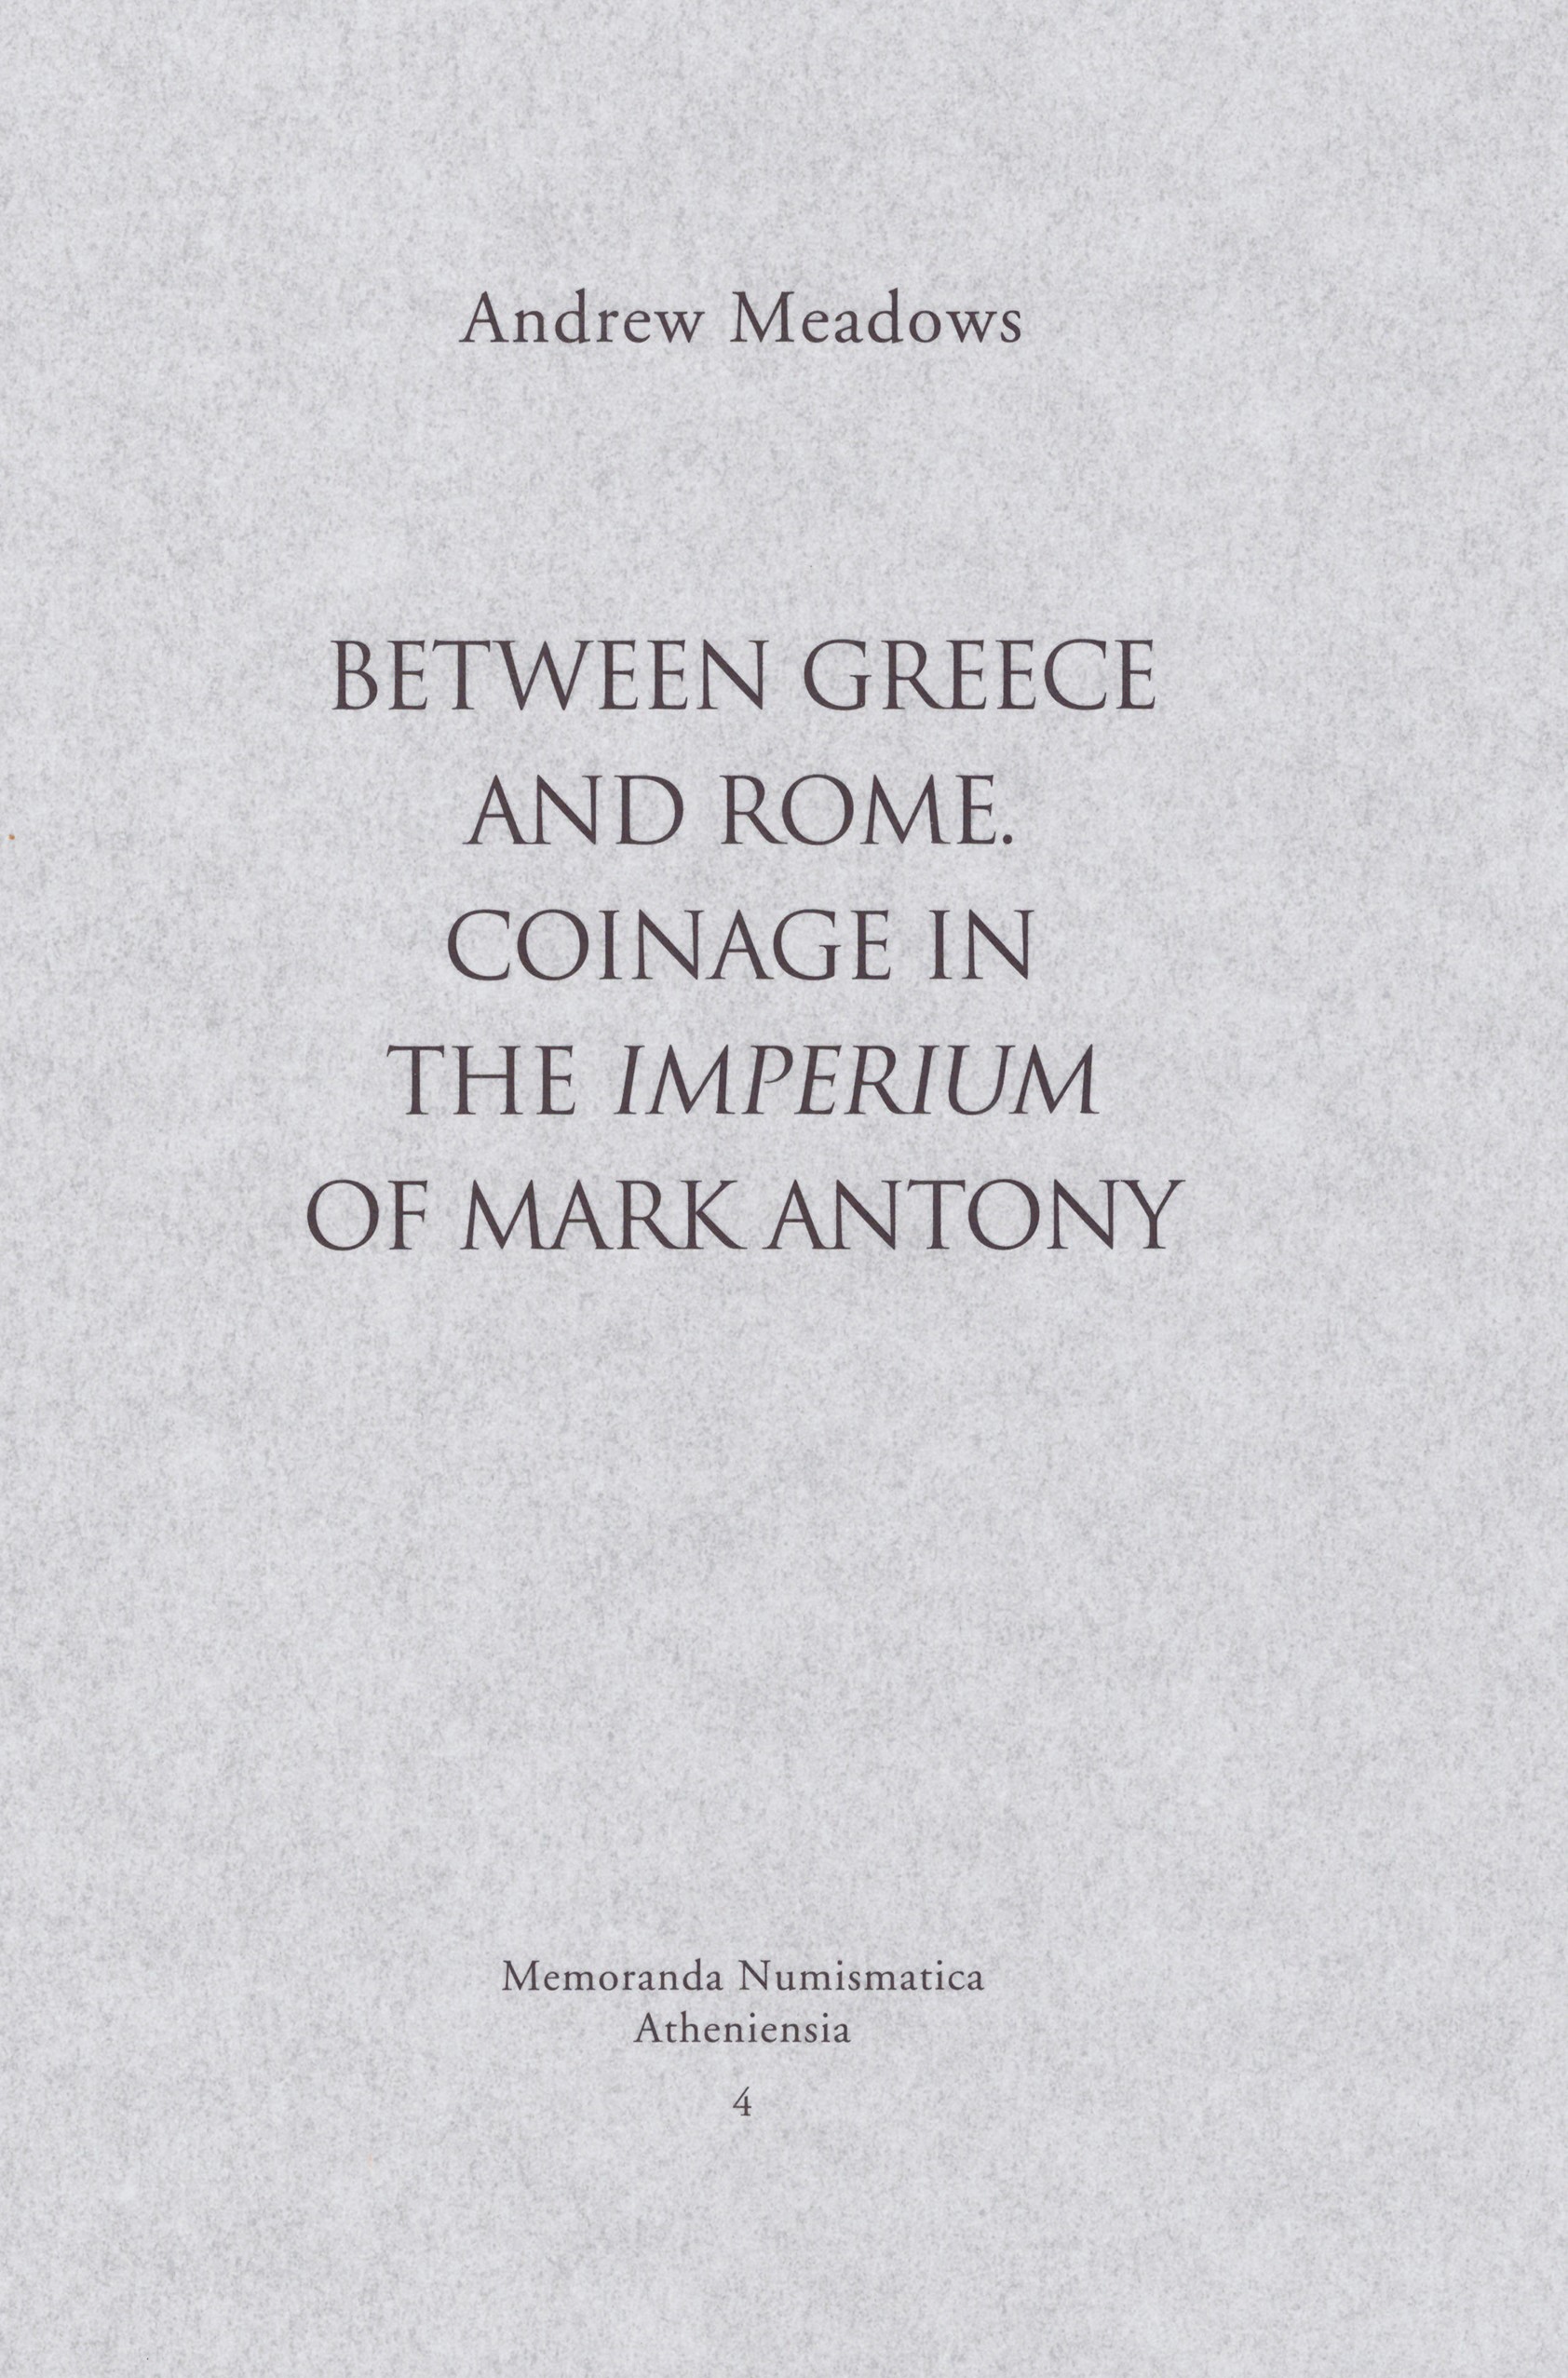 Between Greece and Rome. Coinage in the Imperium of Mark Antony